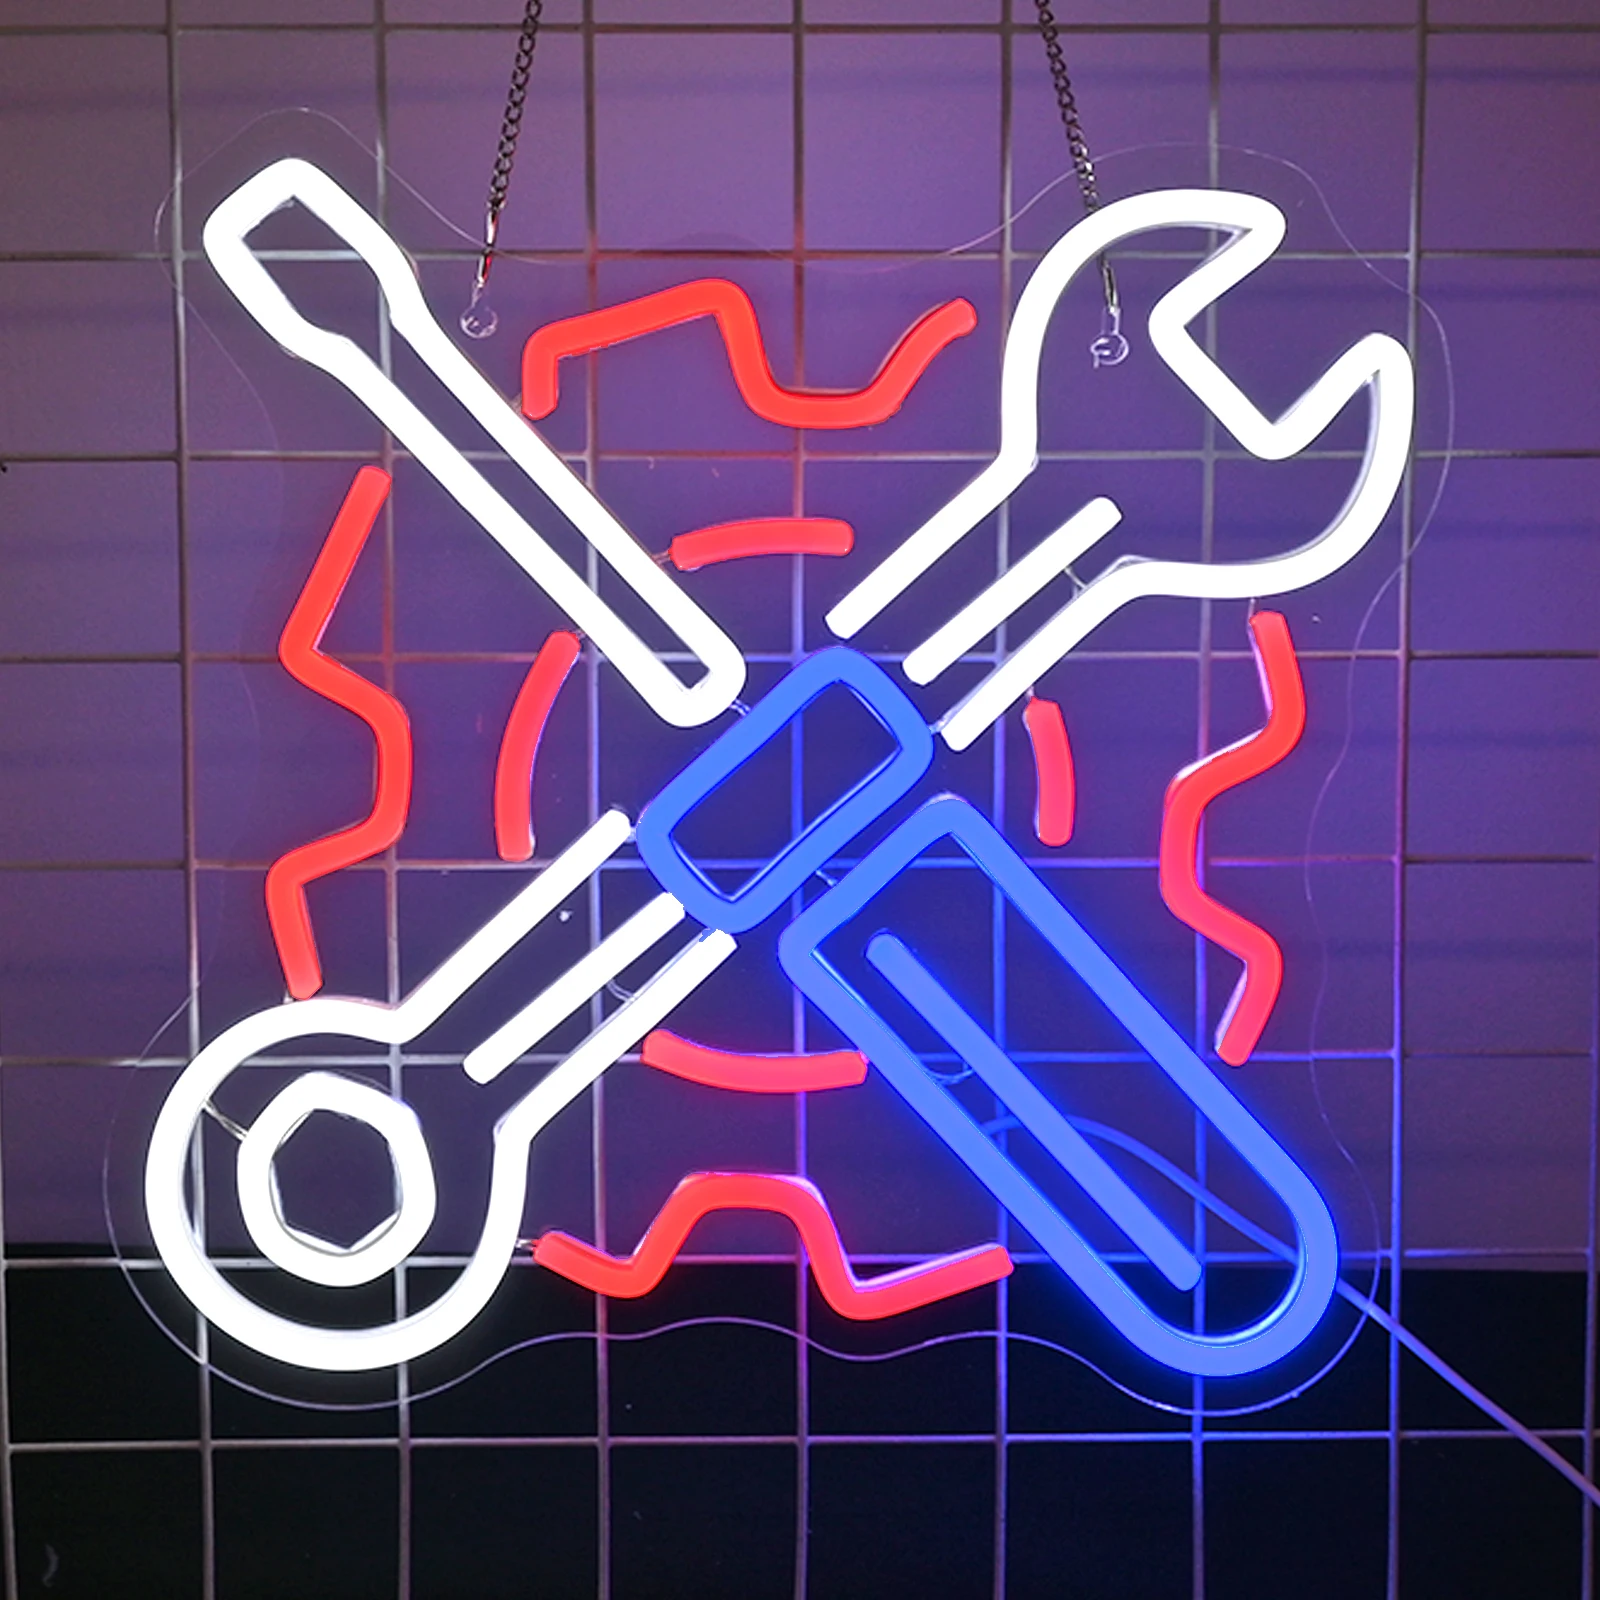 

Car Repair Tool Neon Signs For Wall Decor Led Lights Check Engine Garage Logo Room Decoration Auto Car Shop Light Up Sign Lamp